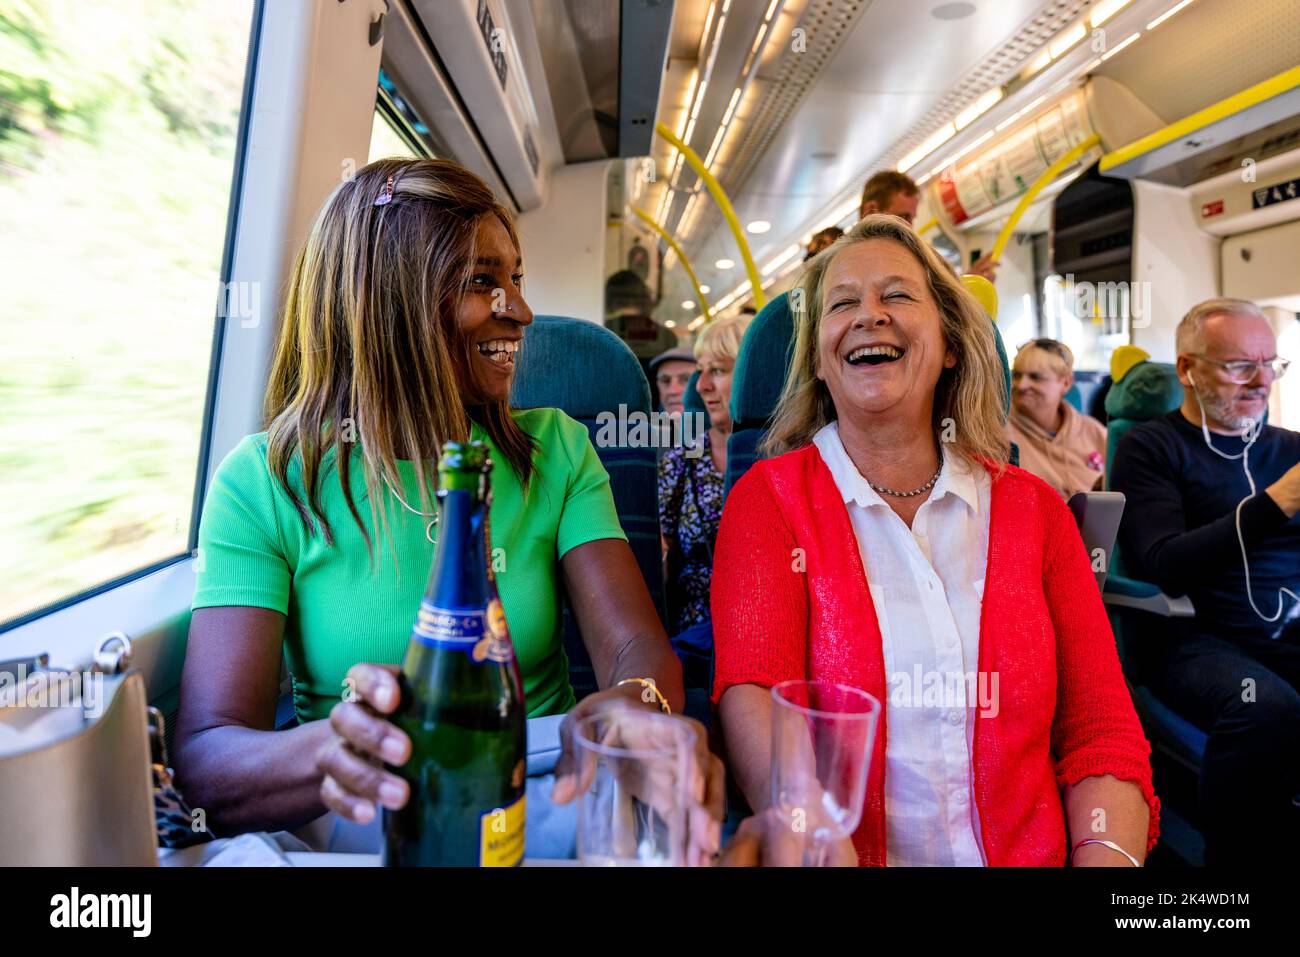 Two Mature Women Enjoy A Glass Of Prosecco On The Train, Sussex, UK. Stock Photo